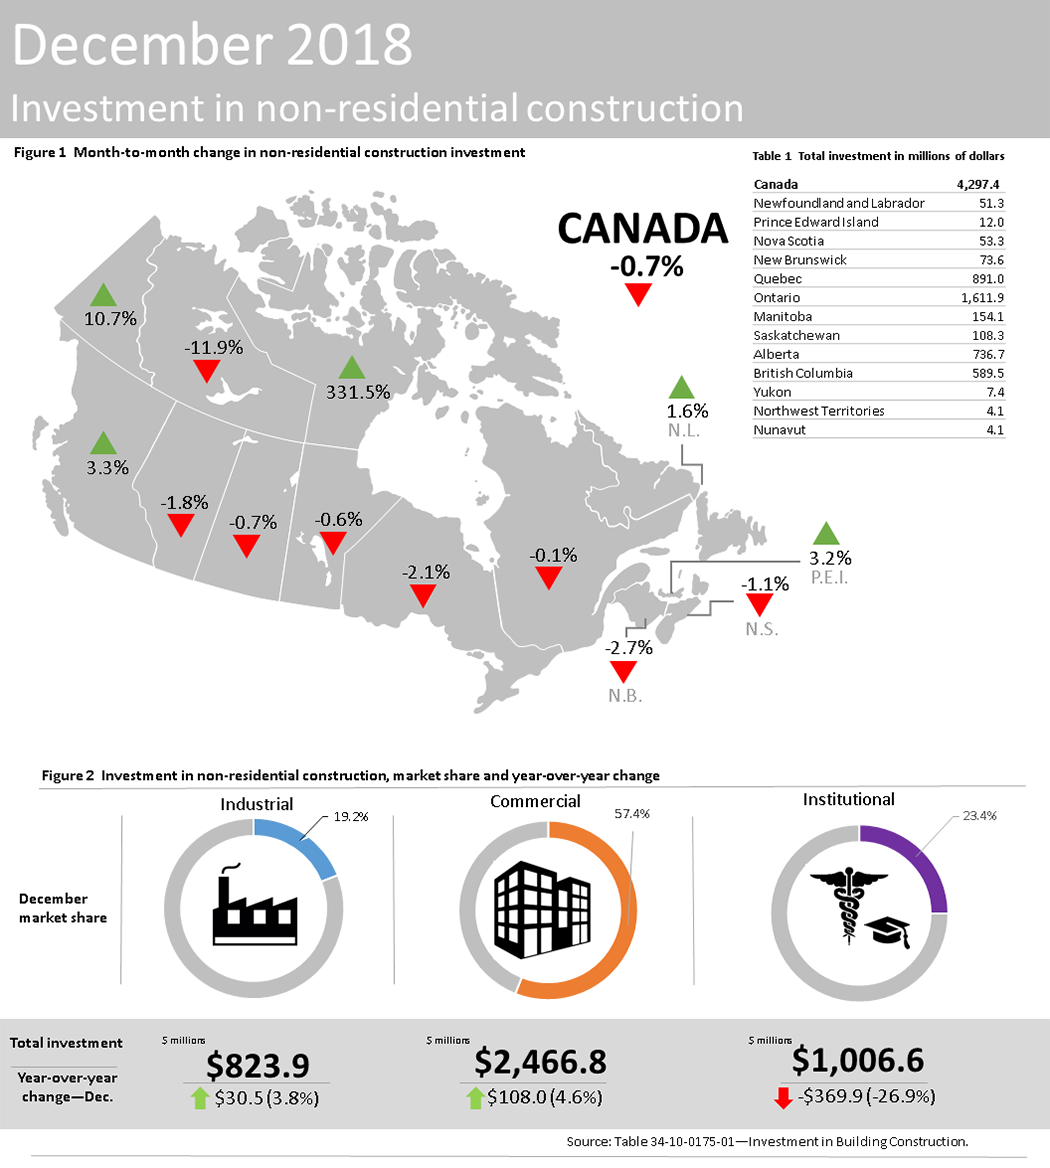 Thumbnail for Infographic 2: Investment in non-residential construction, December 2018